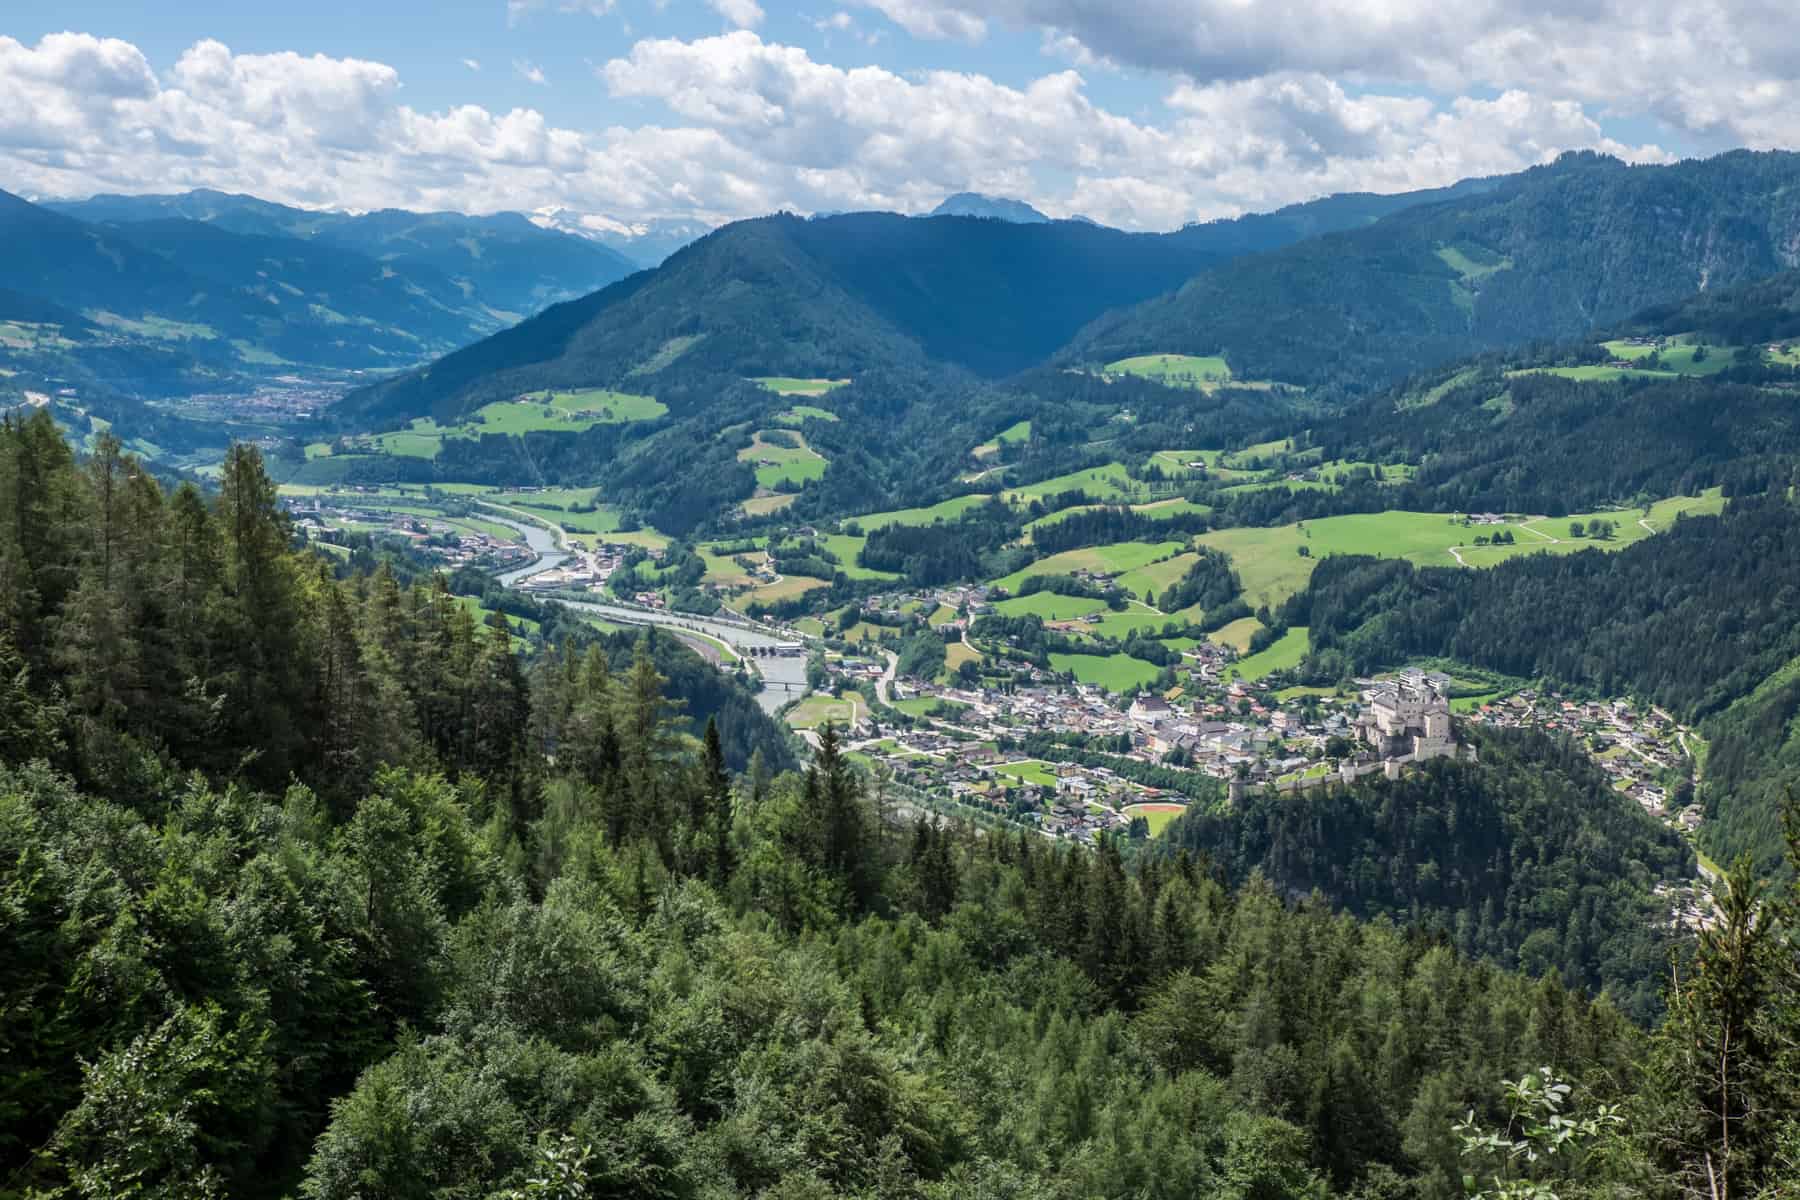 An elevated view of the Salzach River and surrounding valleys and cities, with forest on one side and the Austrian Alps on the other